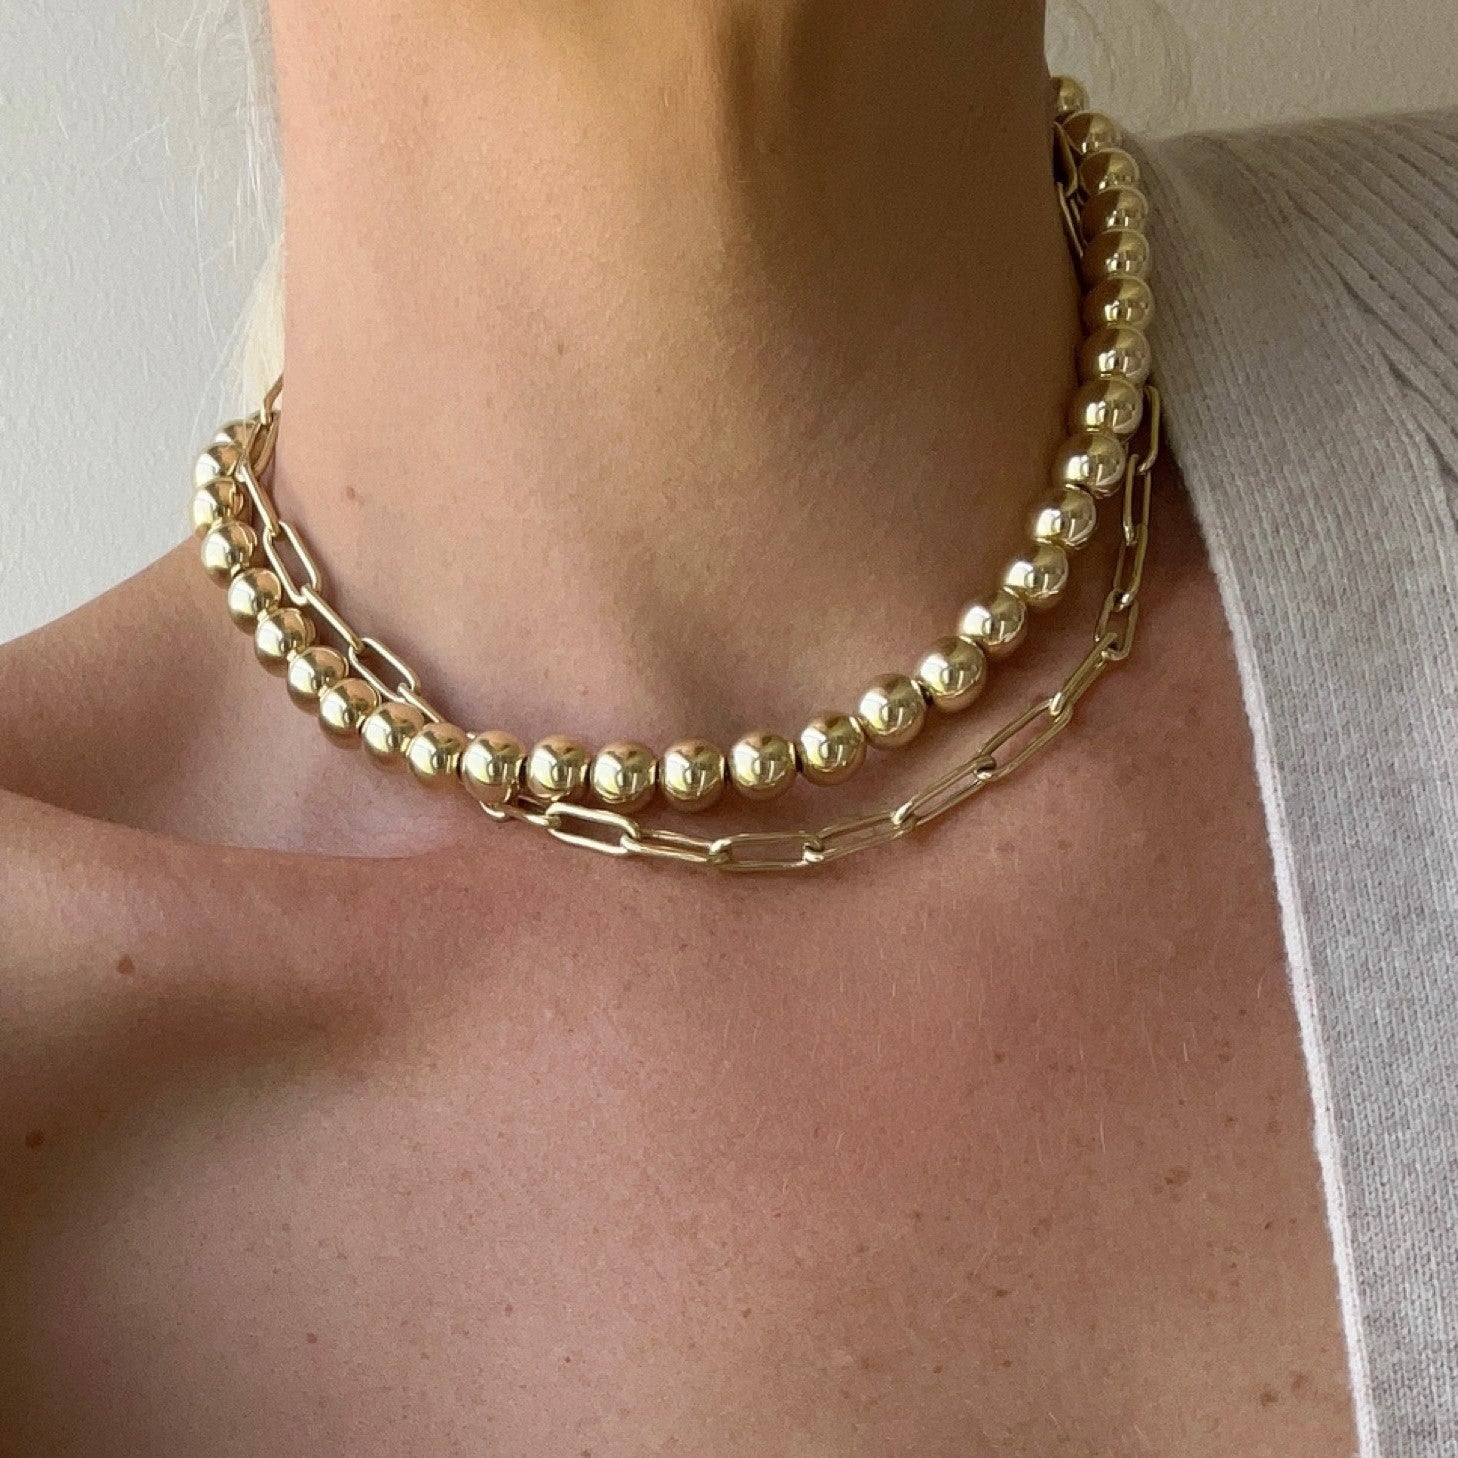 5 Ways to Wear Pearls Featuring Chic Statement Necklaces - TPS Blog